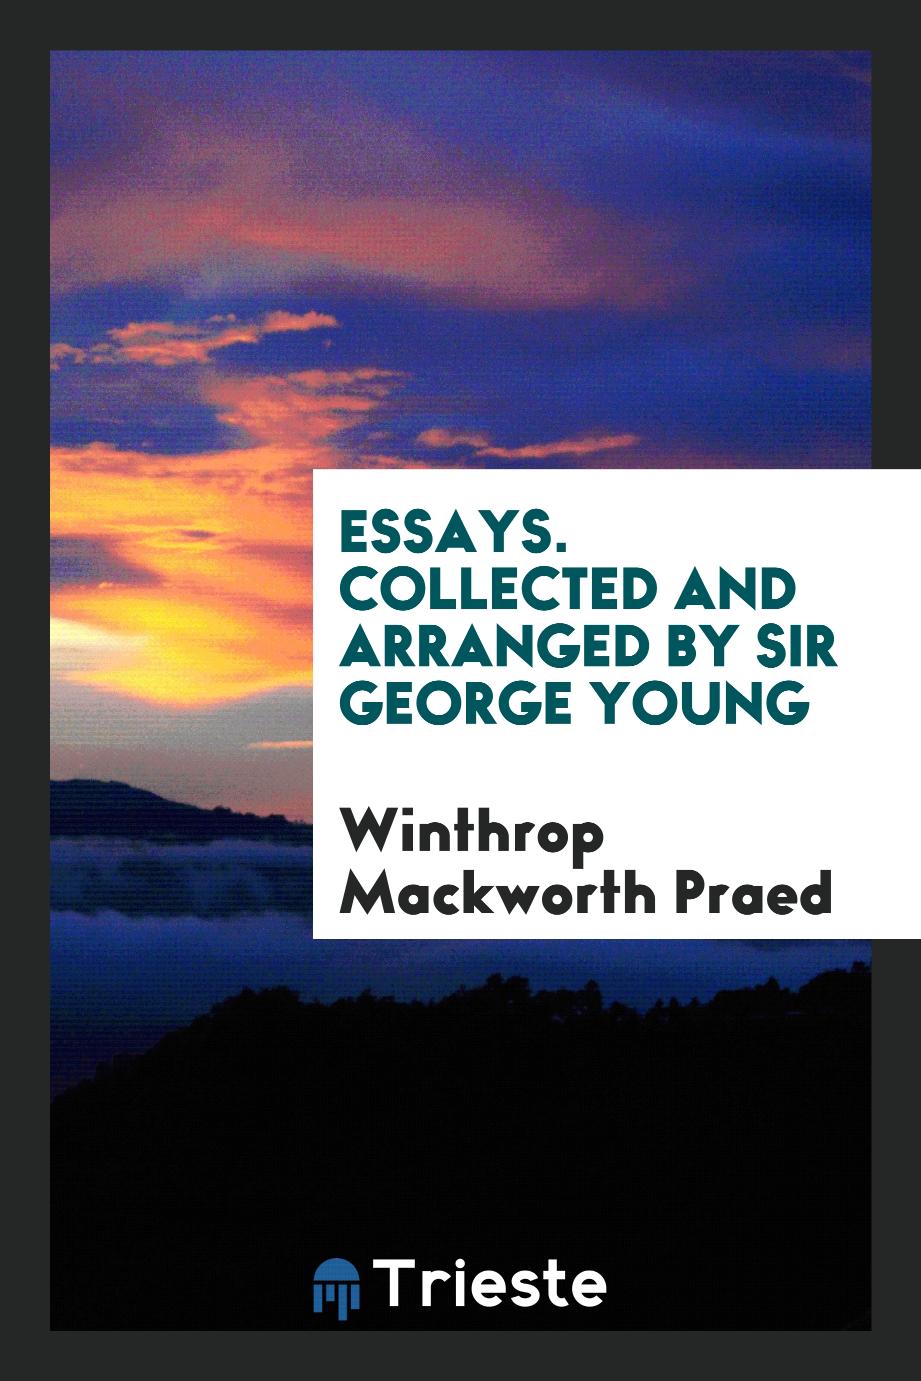 Essays. Collected and arranged by Sir George Young